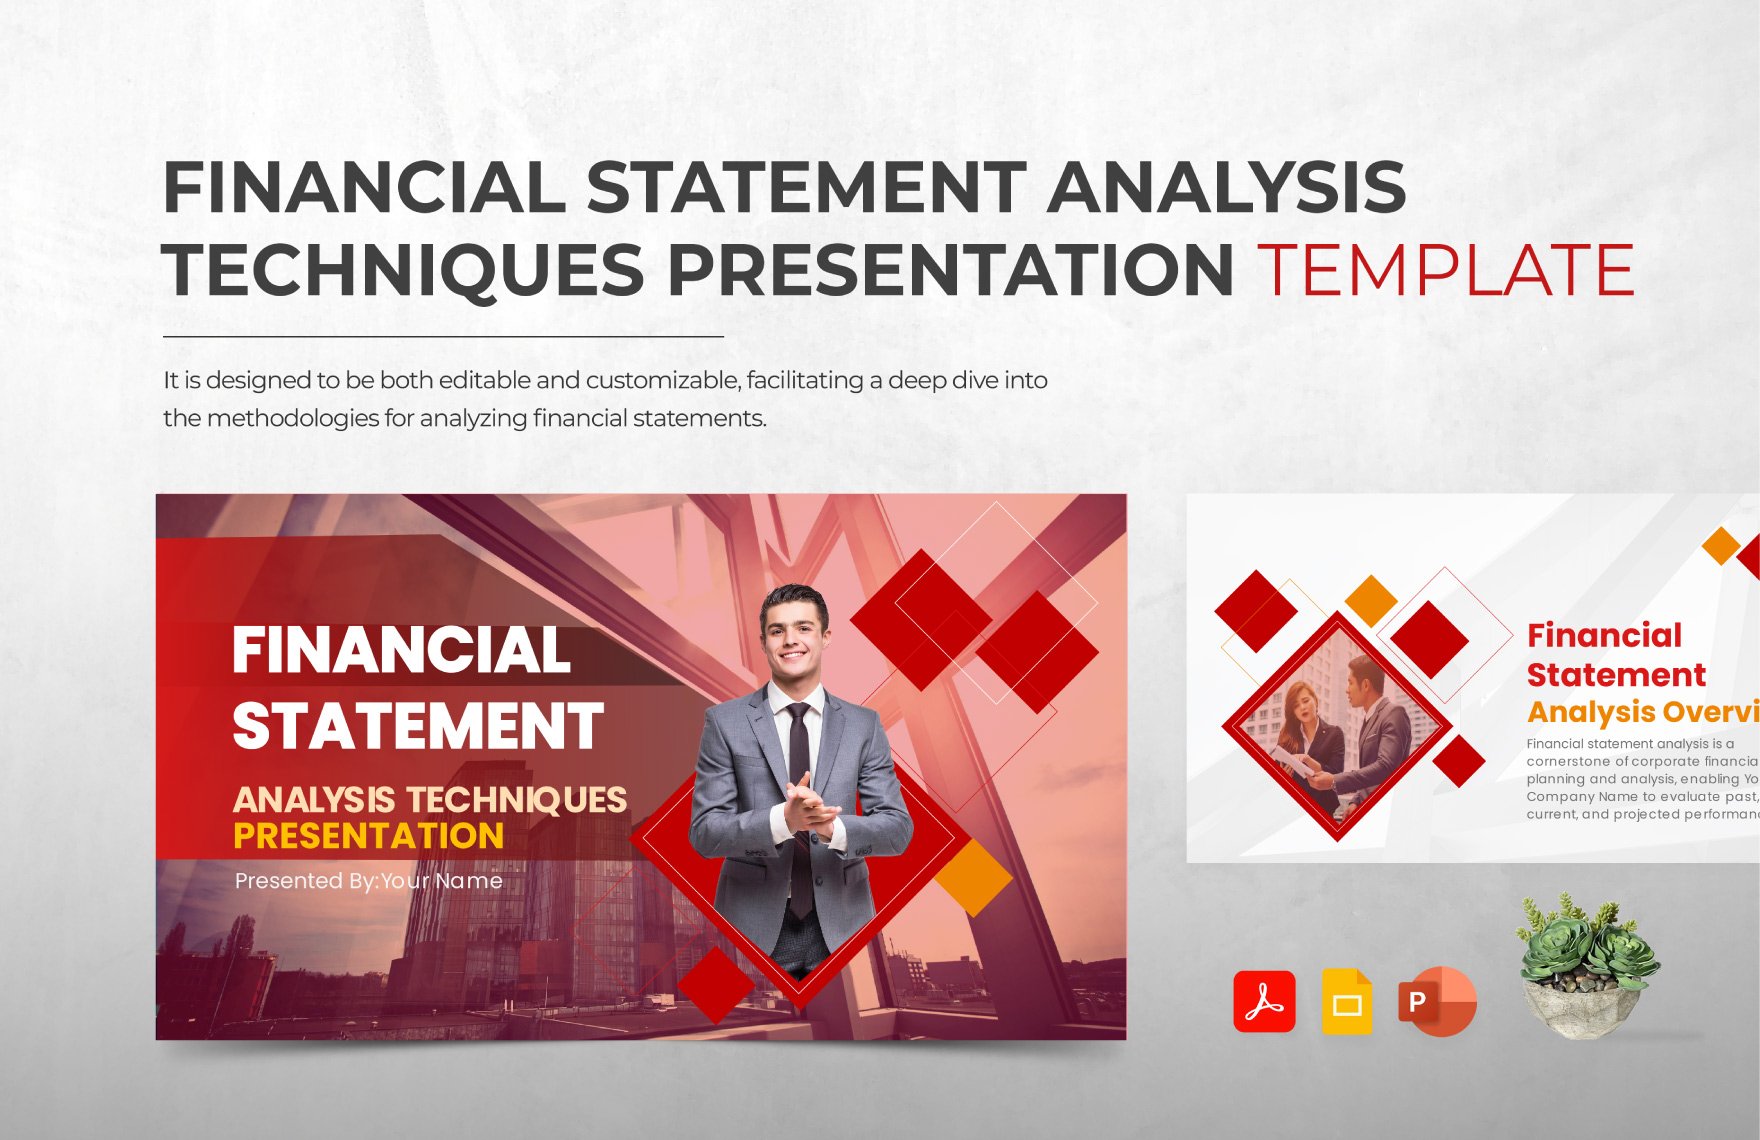 Free Financial Statement Analysis Techniques Presentation Template in PDF, PowerPoint, Google Slides